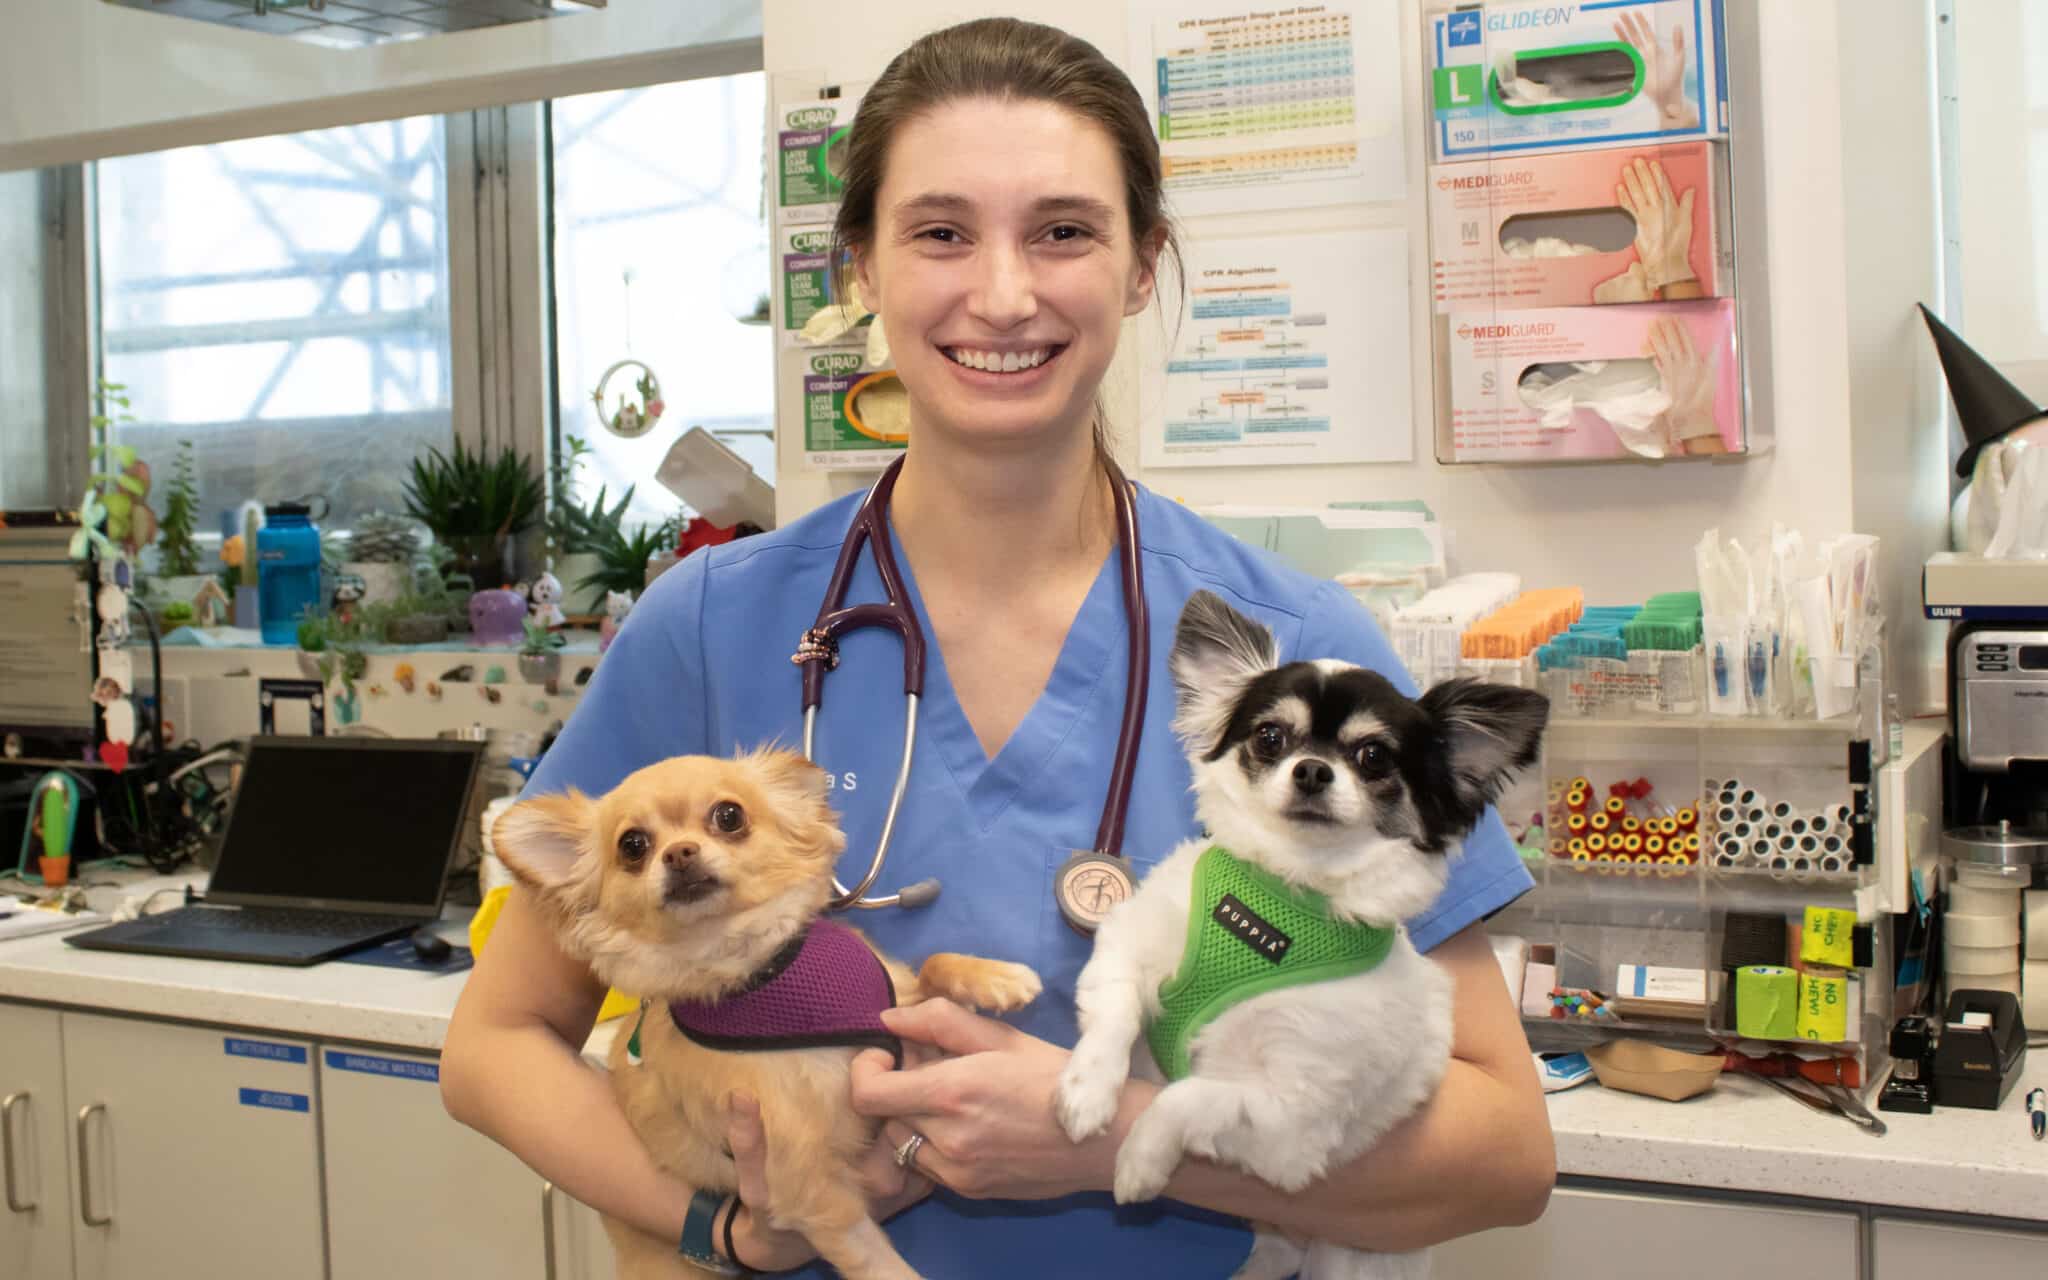 https://www.amcny.org/wp-content/uploads/2023/08/A-Veterinary-Technician-with-Two-Dogs-edited-scaled.jpg